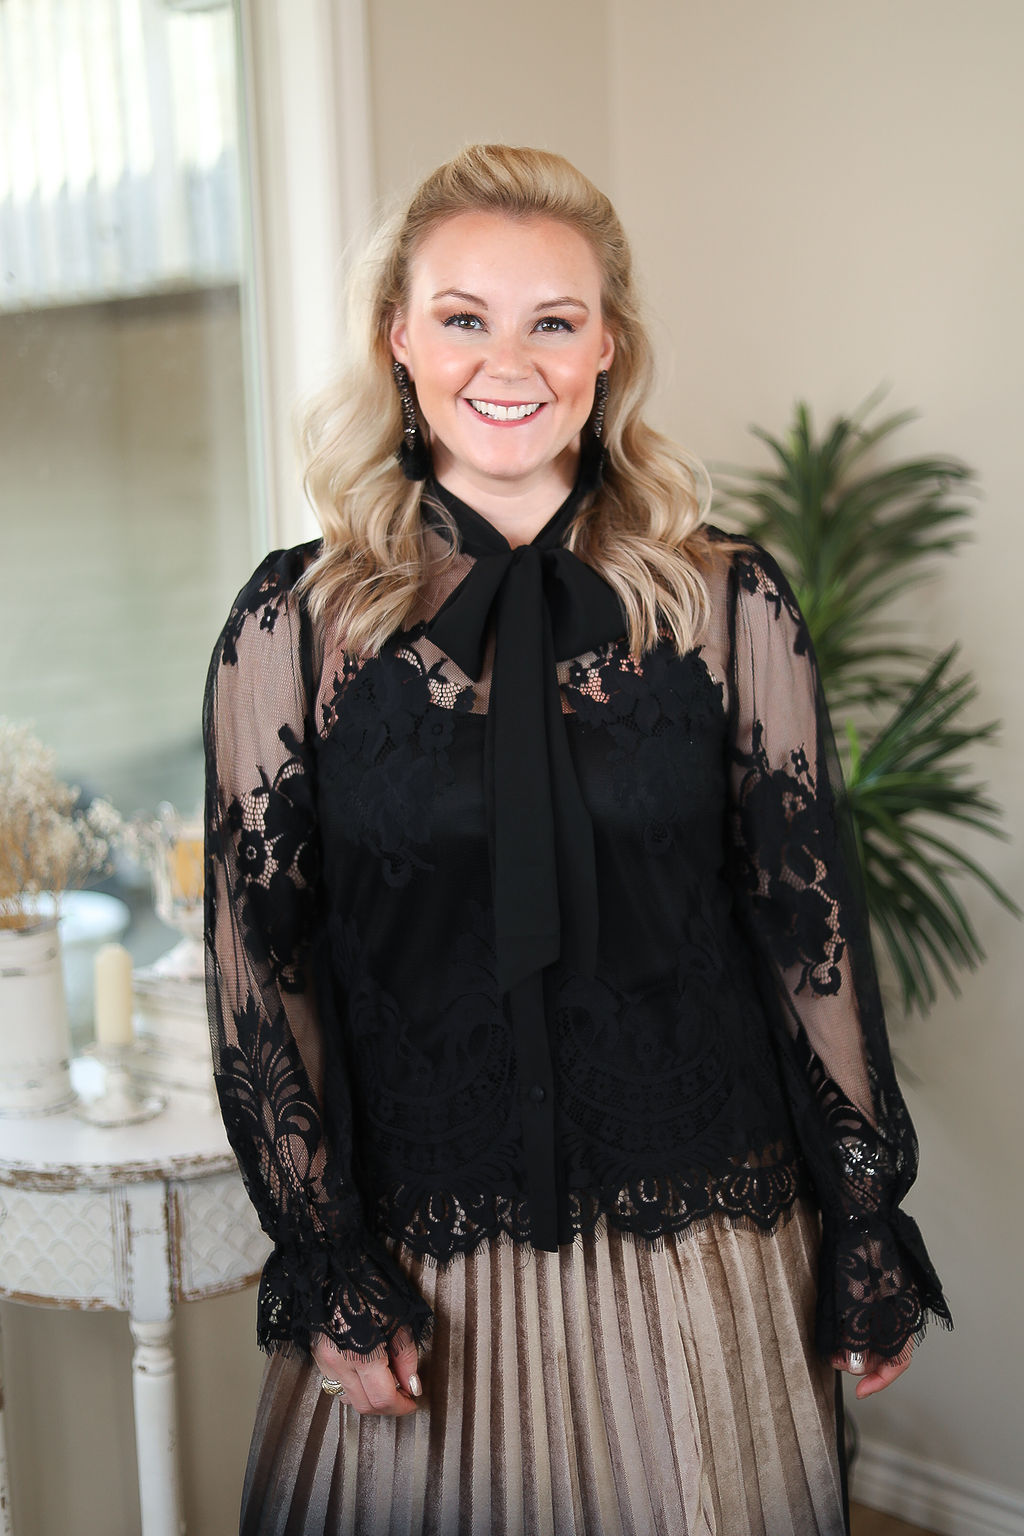 Last Chance Size Small | Blown Away Button Up Lace Frill Shirt with Neck Tie in Black - Giddy Up Glamour Boutique